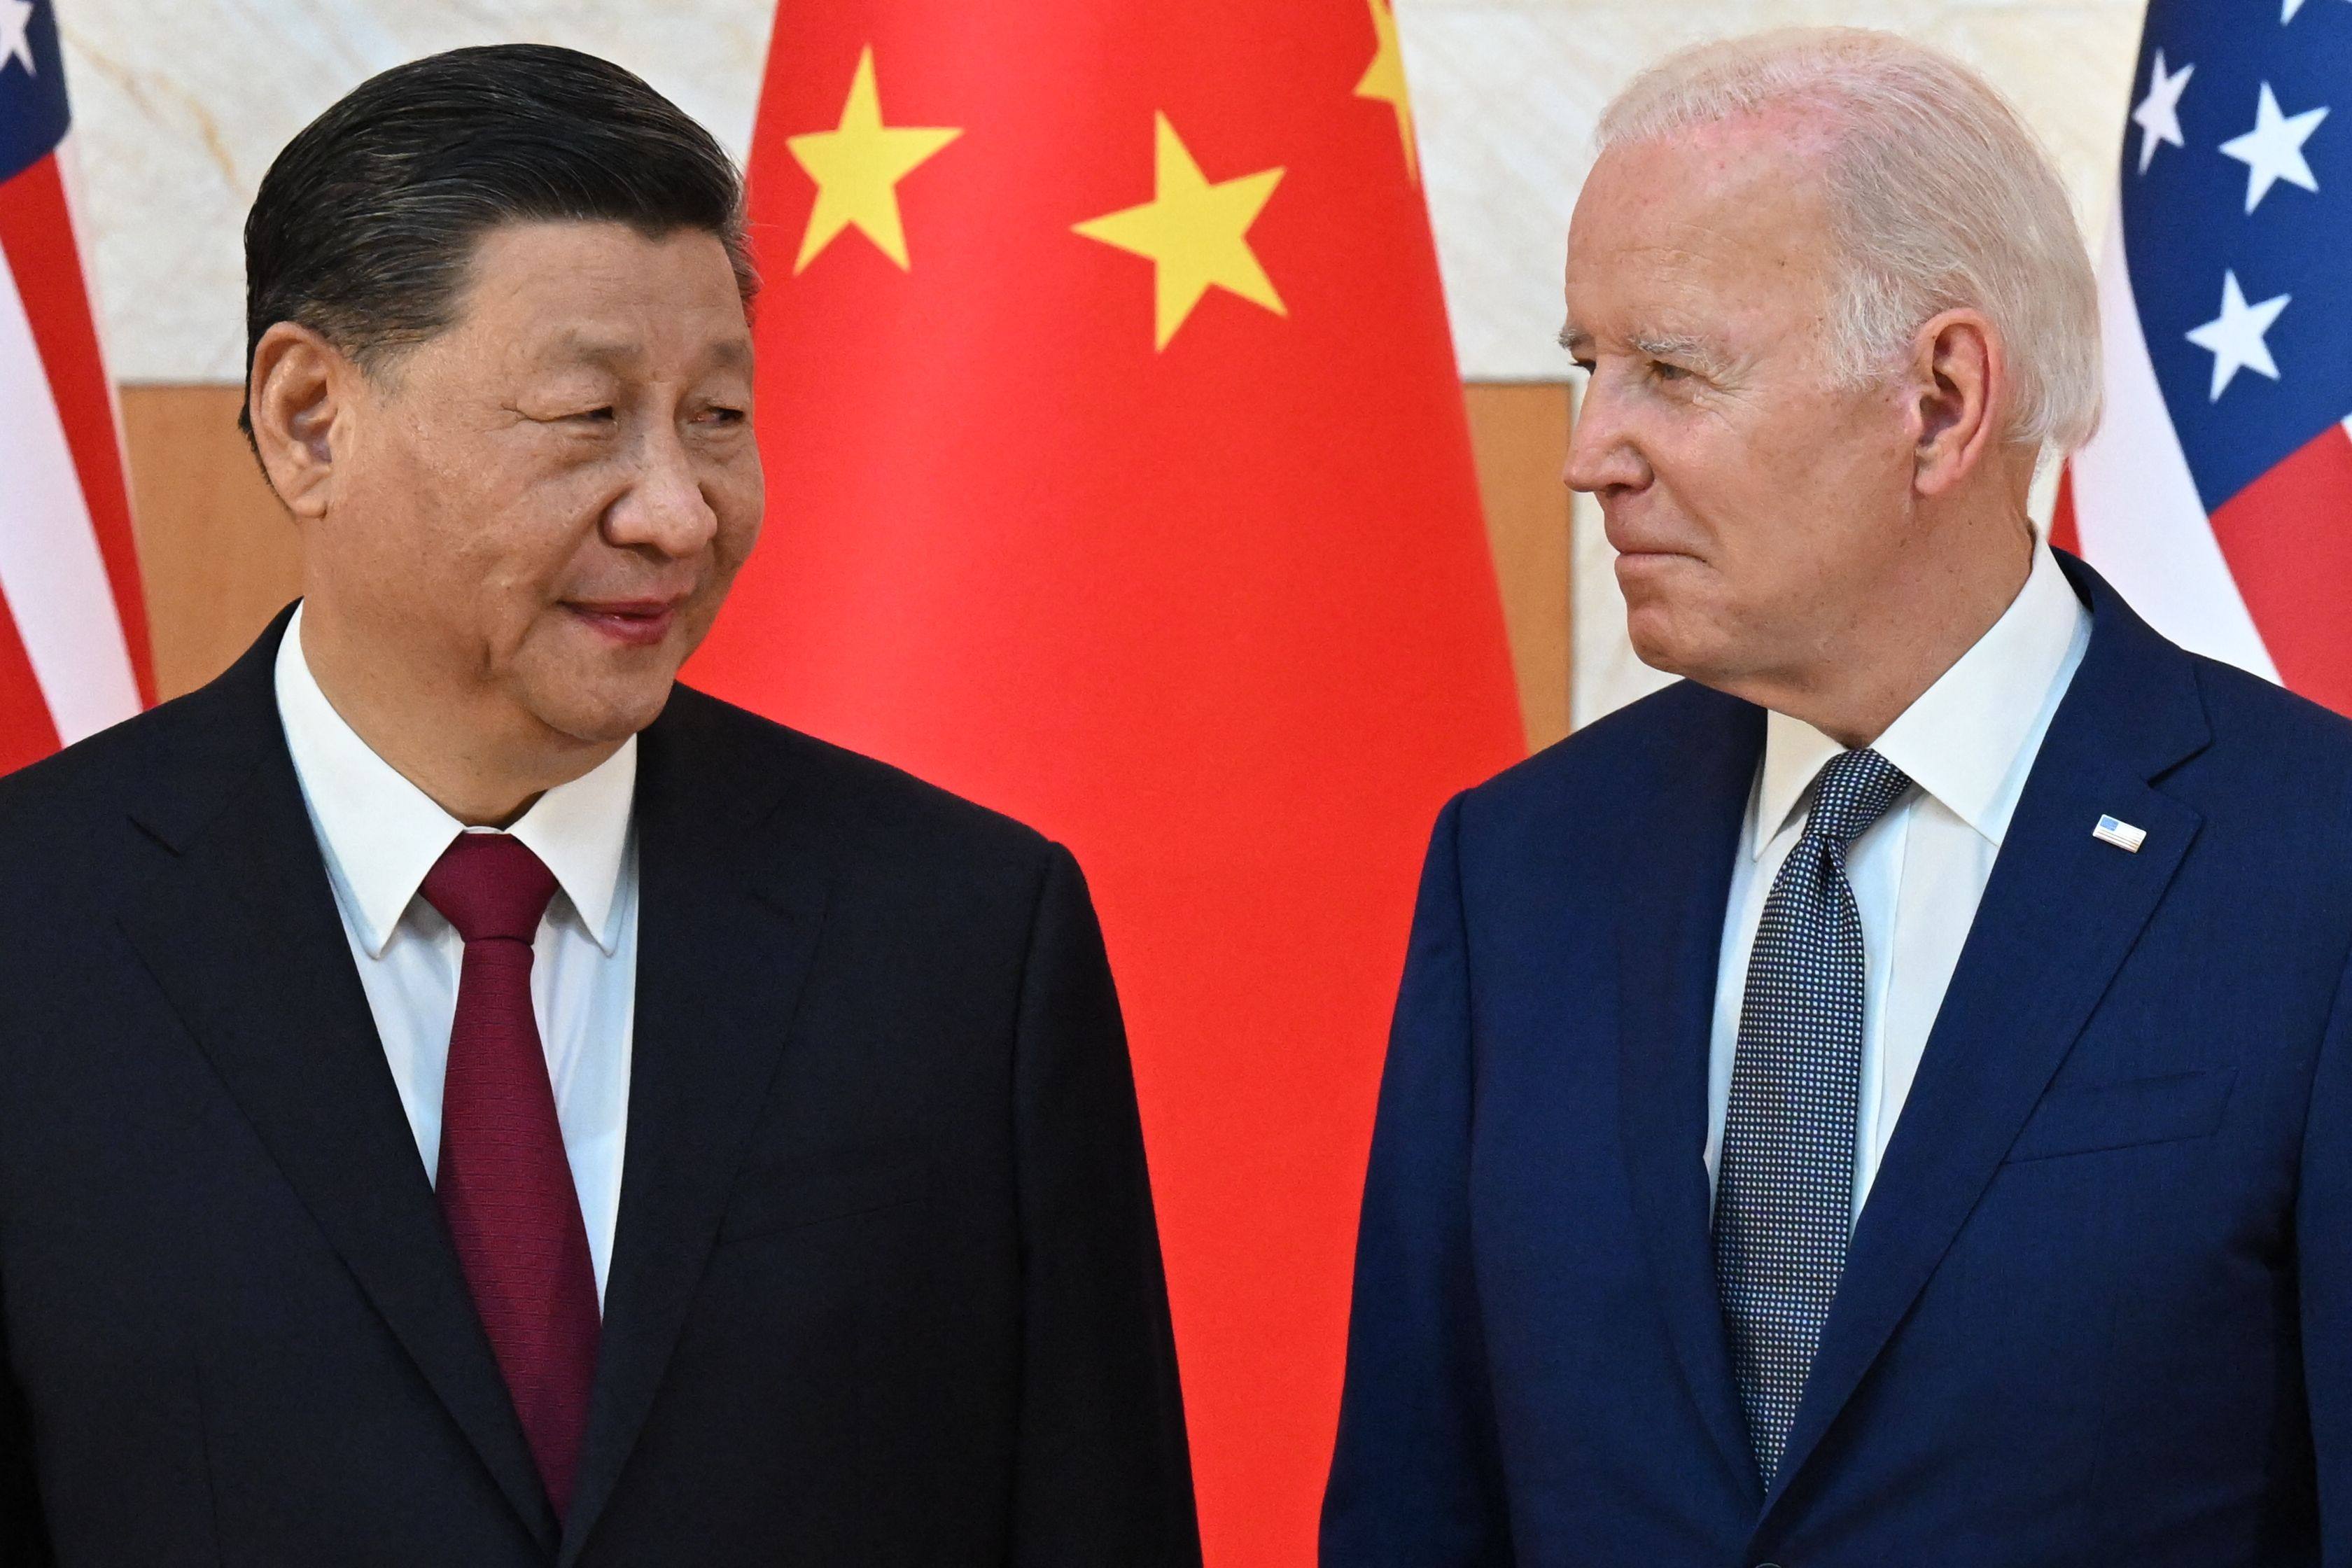 Shaky relations between the US and China, as well as China’s emphasis on security, have discouraged American investment, a US trade group has said. Photo: AFP